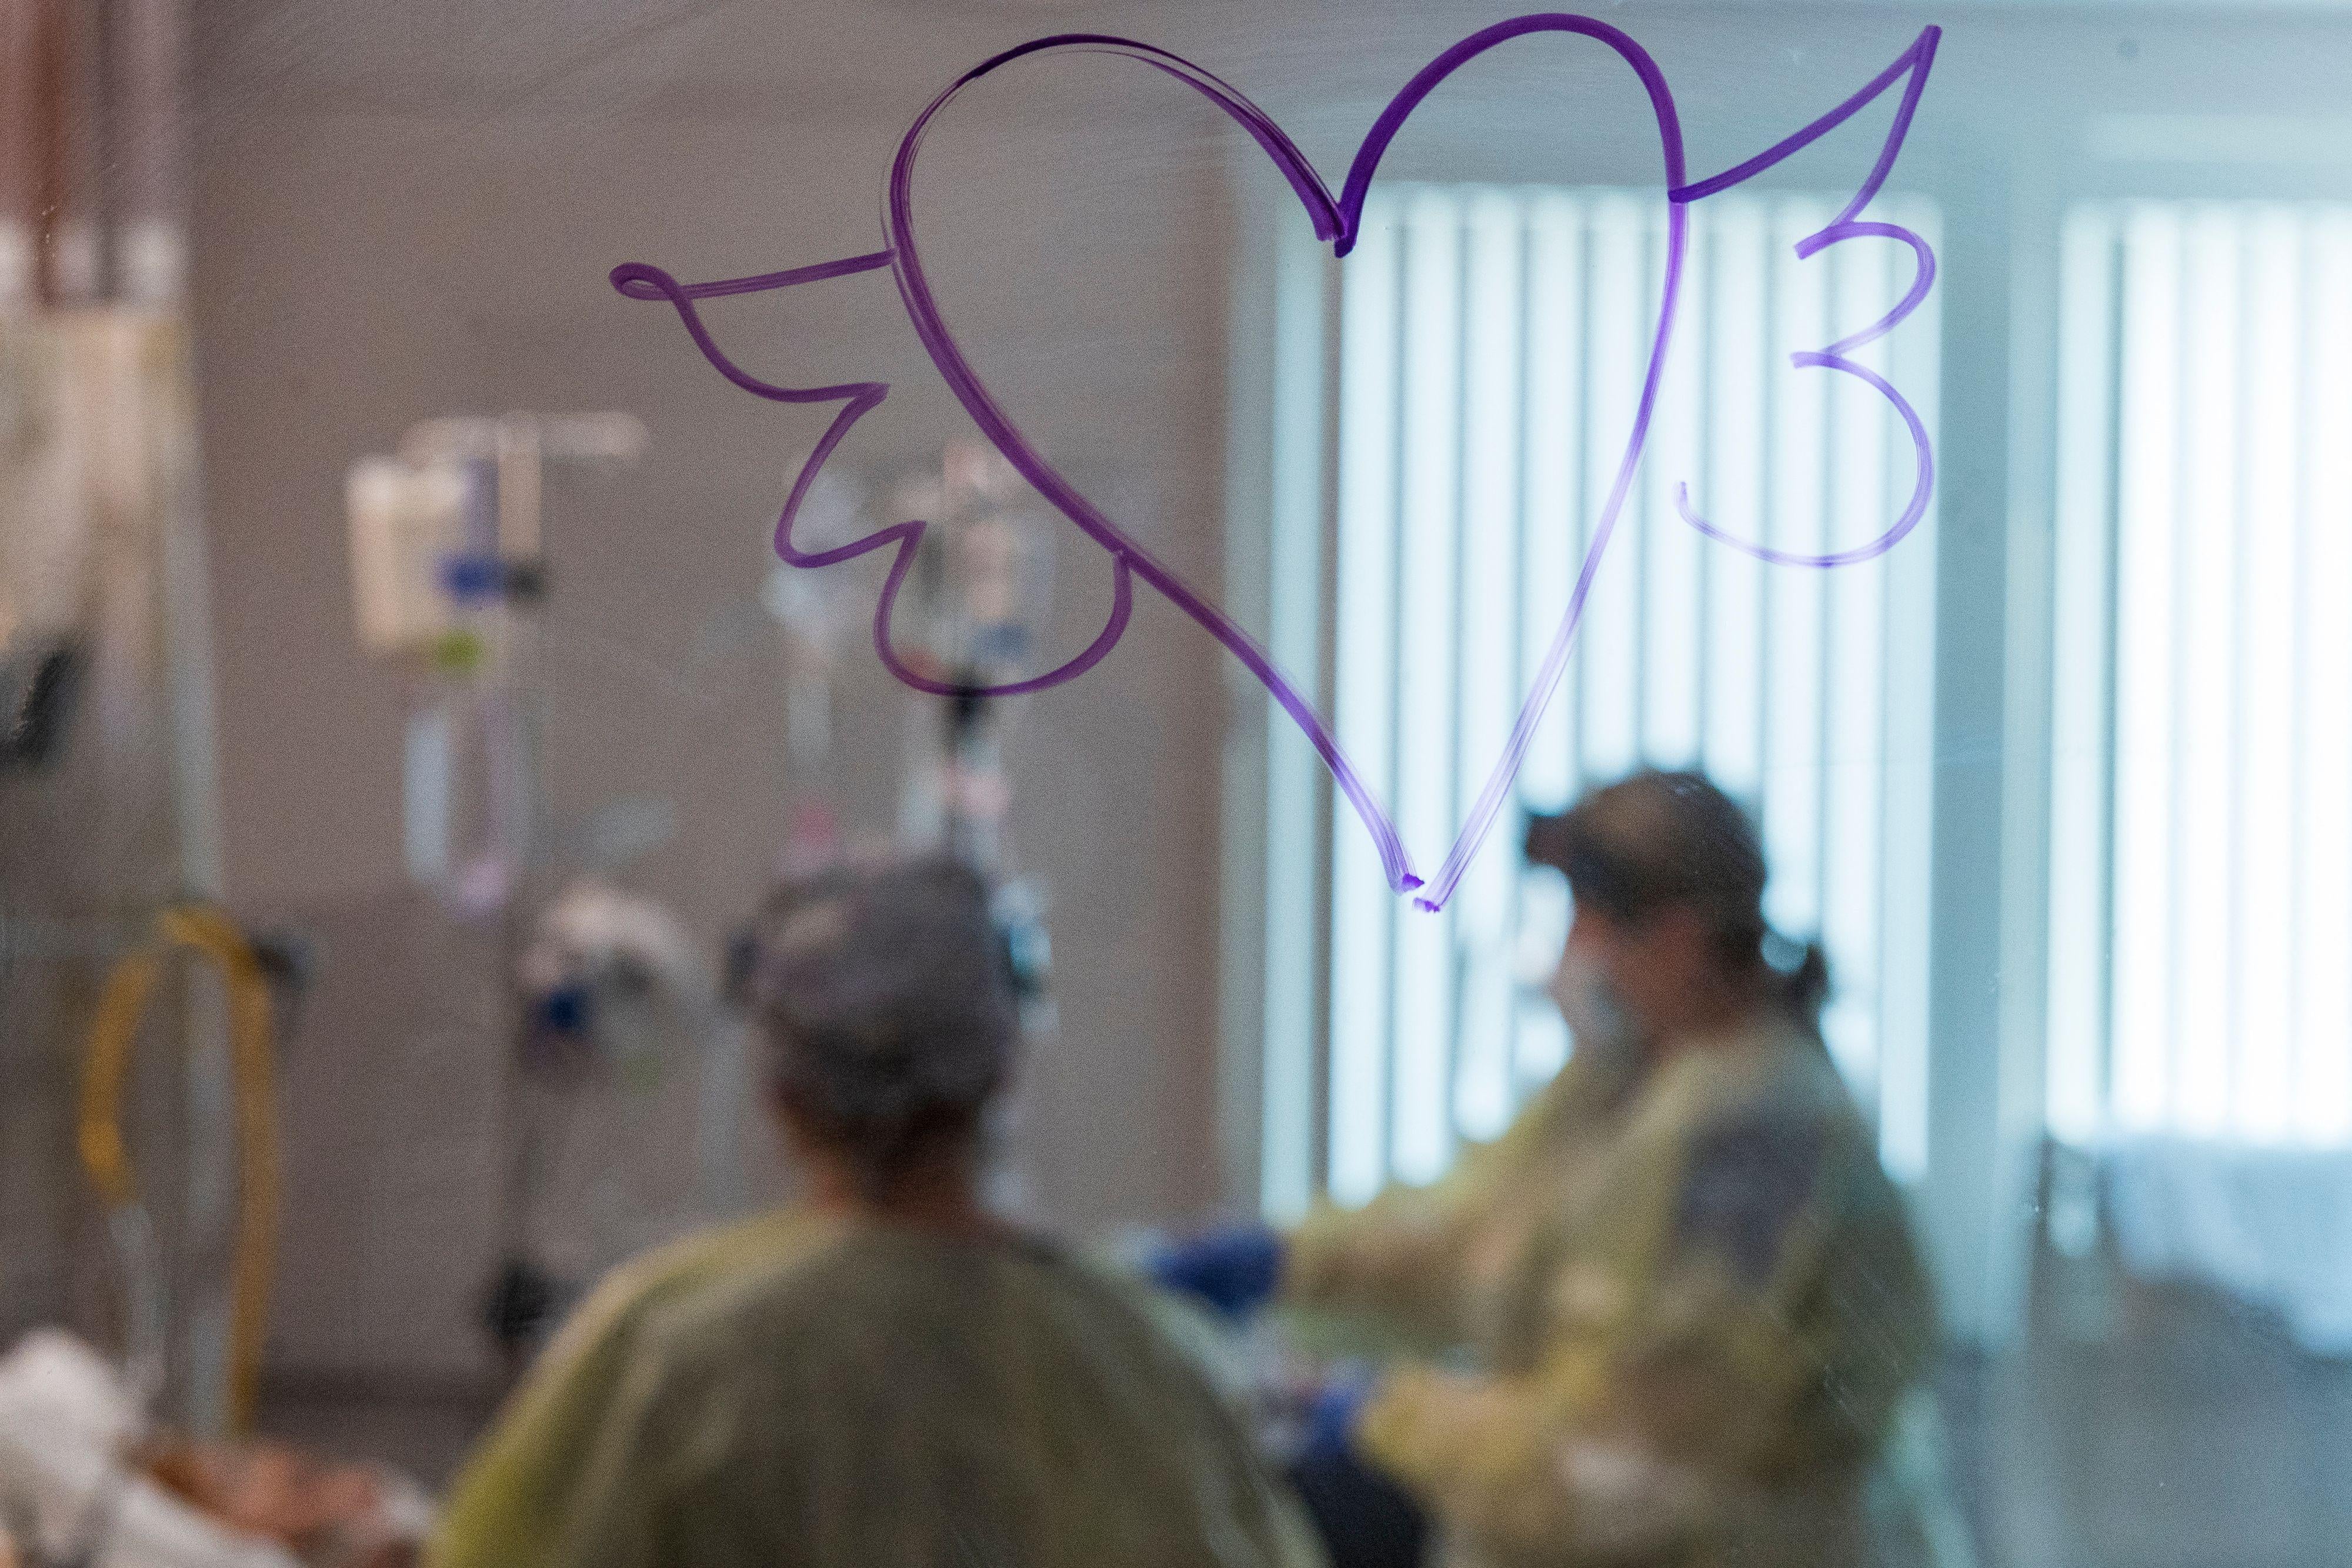 A heart with wings is drawn on the window as nurses care for a Covid-19 patient inside the intensive care unit at Adventist Health in Sonora, California on August 27, 2021. 